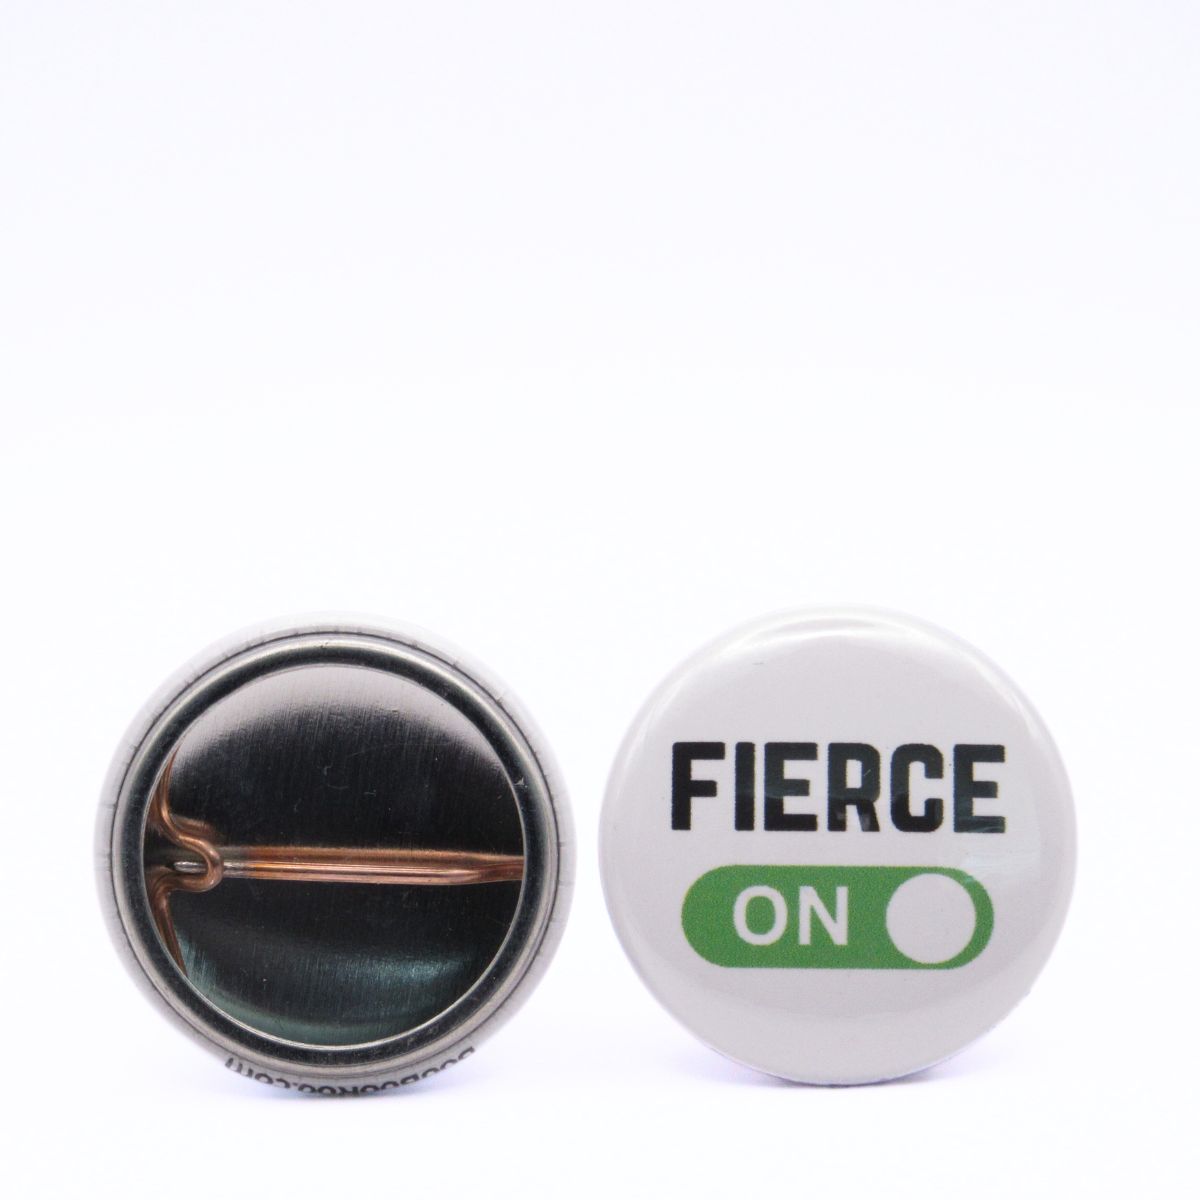 BooBooRoo Pinback Button (i.e. button, badge, pin) displaying fierce mode is on. Image showing front and back of high-quality metal button.